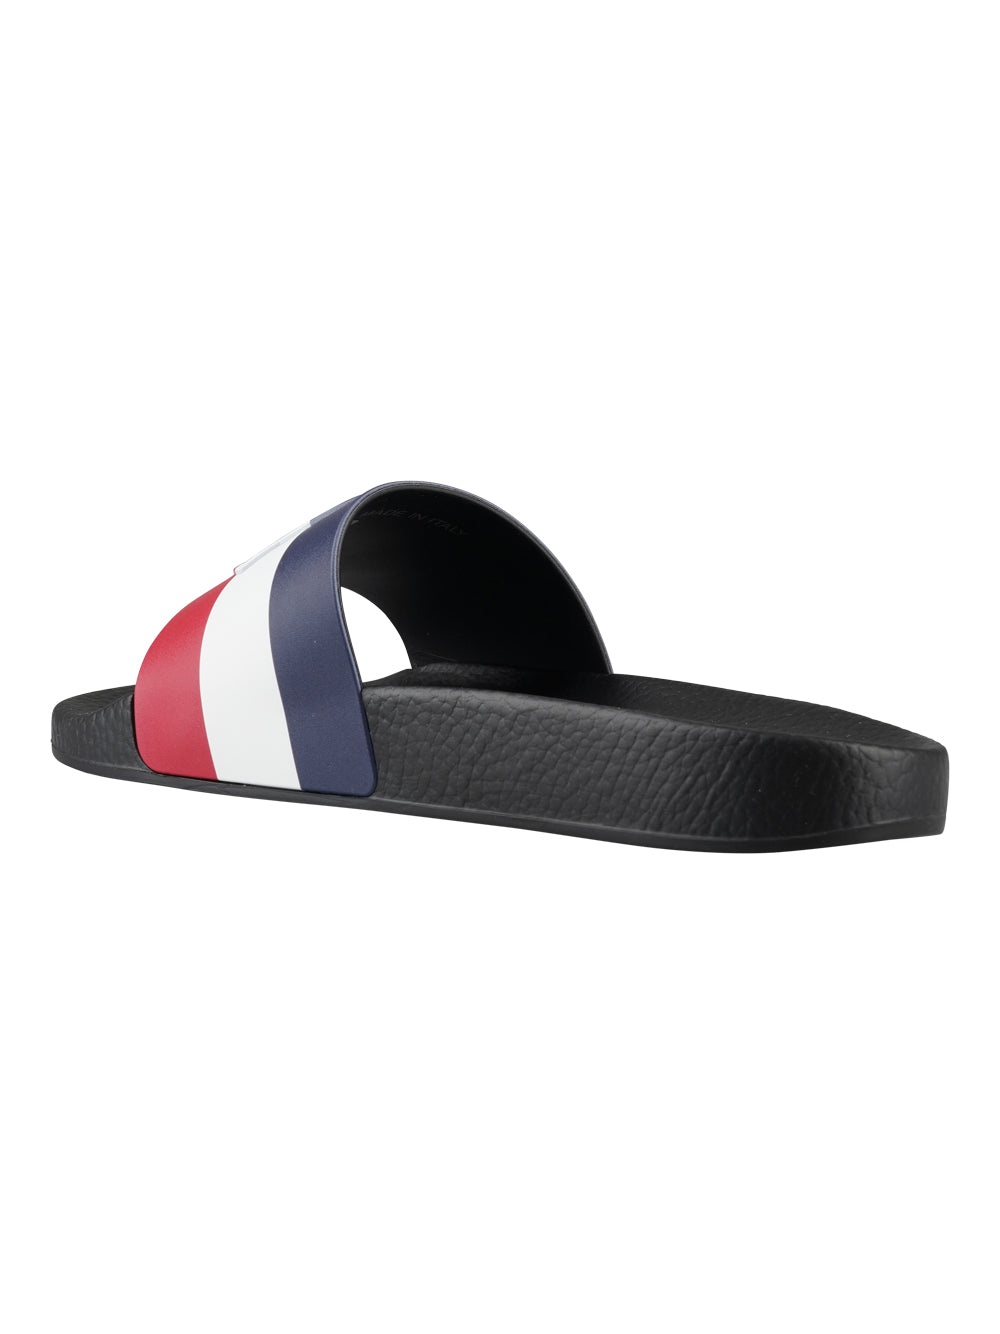 MONCLER SLIPPERS - 11